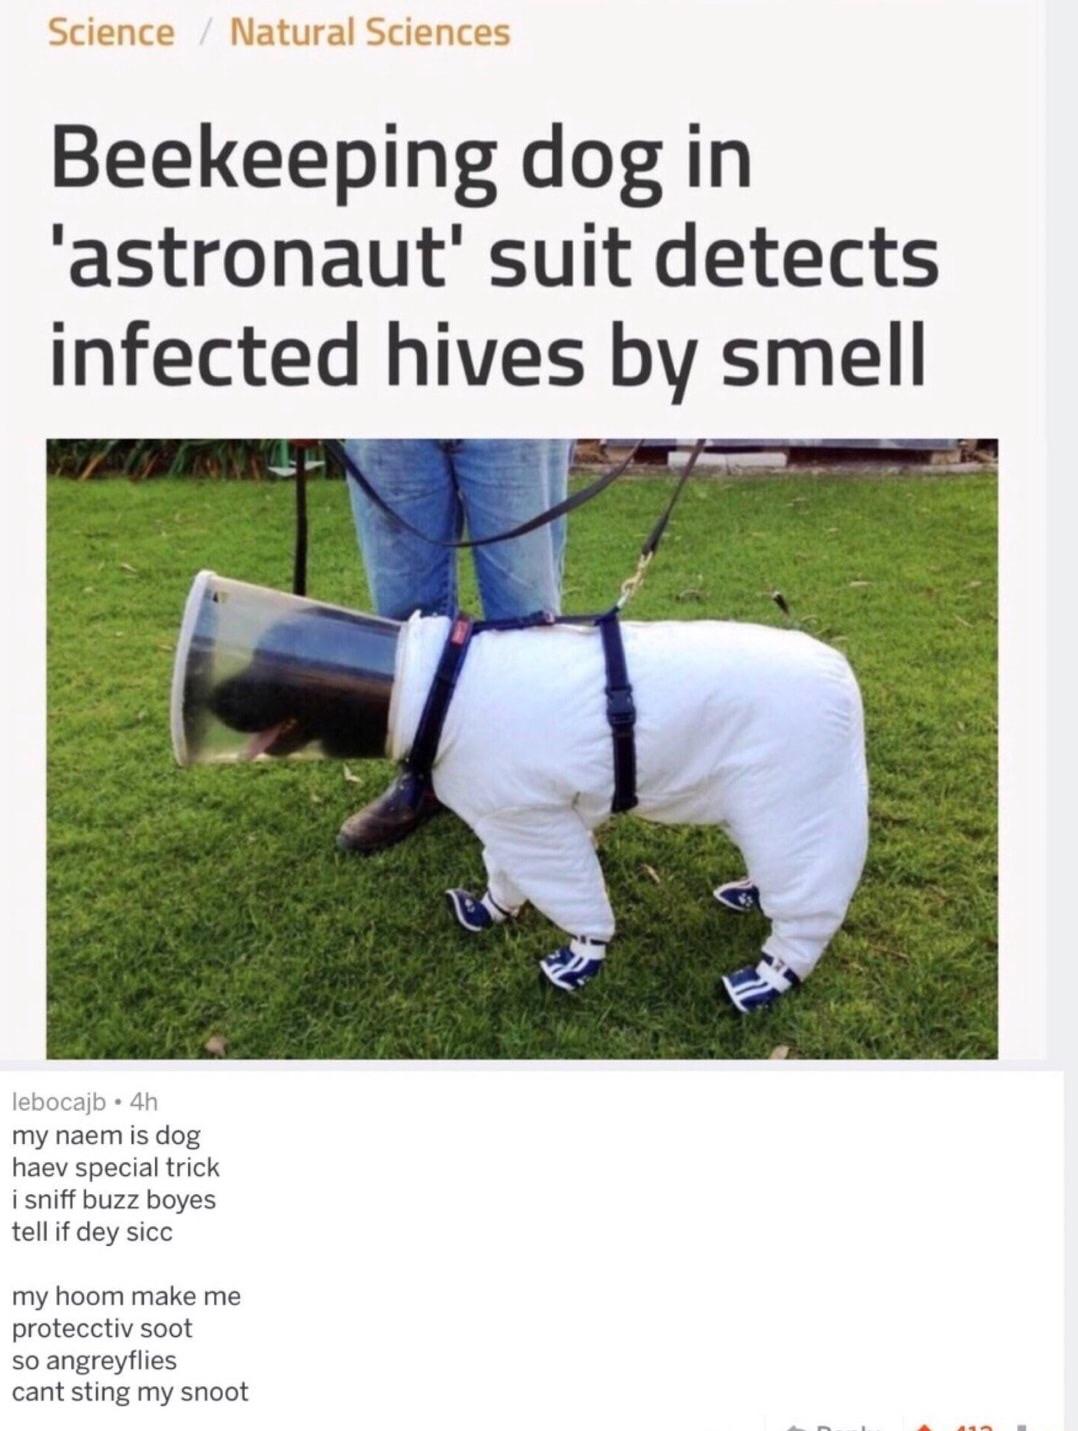 wholesome memes - beekeeping dog - Science Natural Sciences Beekeeping dog in 'astronaut' suit detects infected hives by smell lebocajb4h my naem is dog haev special trick i sniff buzz boyes tell if dey sicc my hoom make me protecctiv soot so angreyflies 